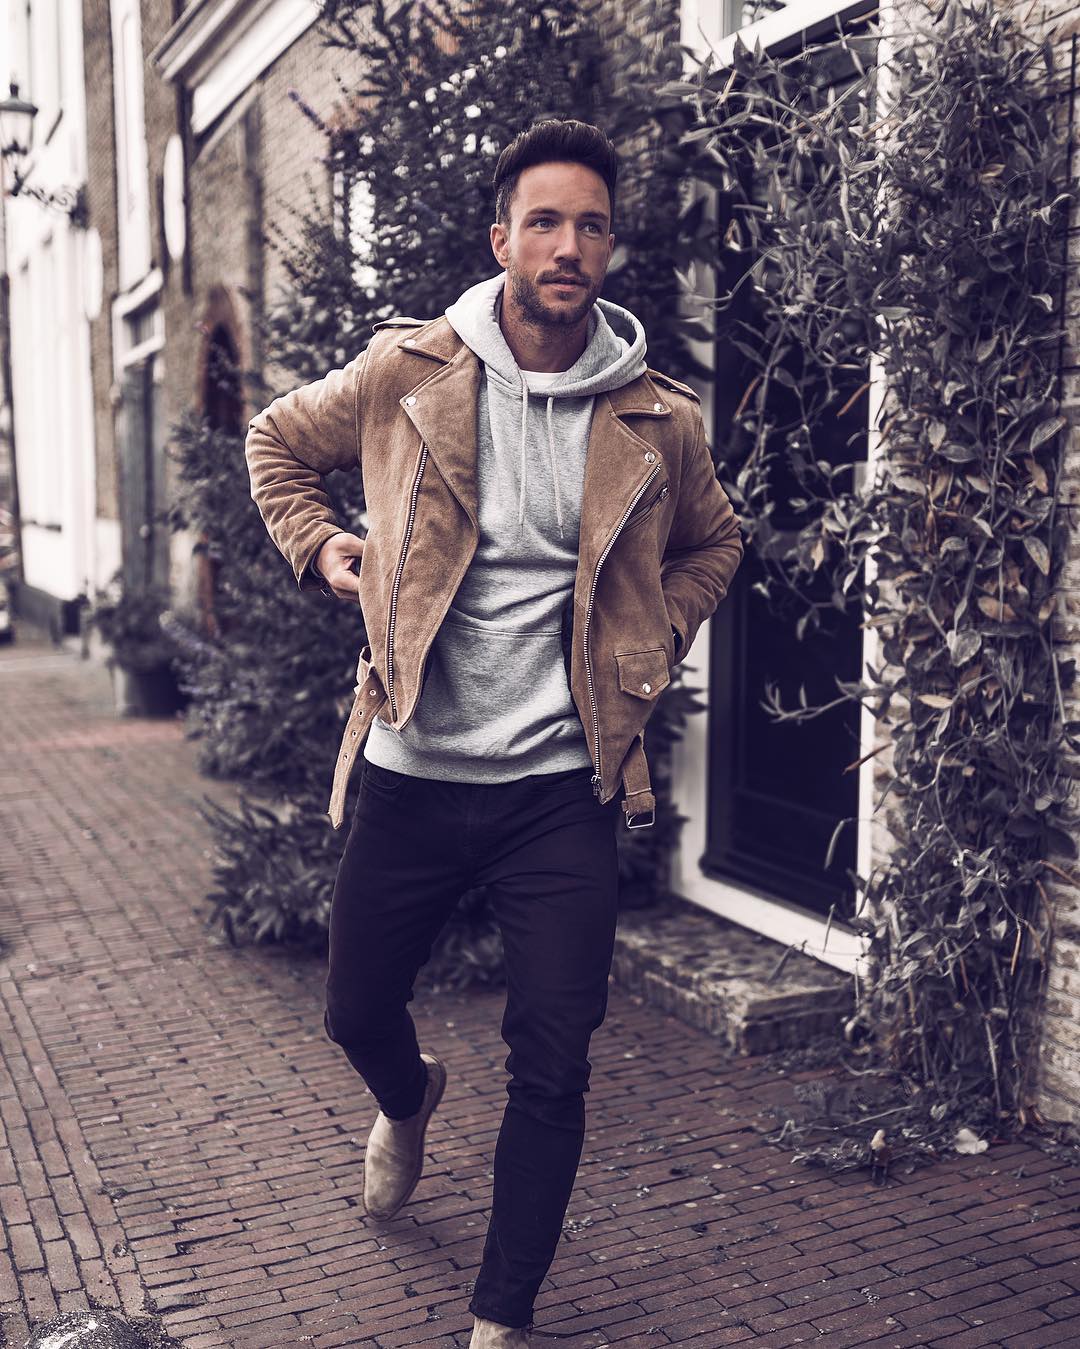 Looking for some amazing winter outfits? Then you are going to love these 5 insanely cool winter outfits I've curated for you today. #winter #outfit #ideas #mens #fashion #street #style 